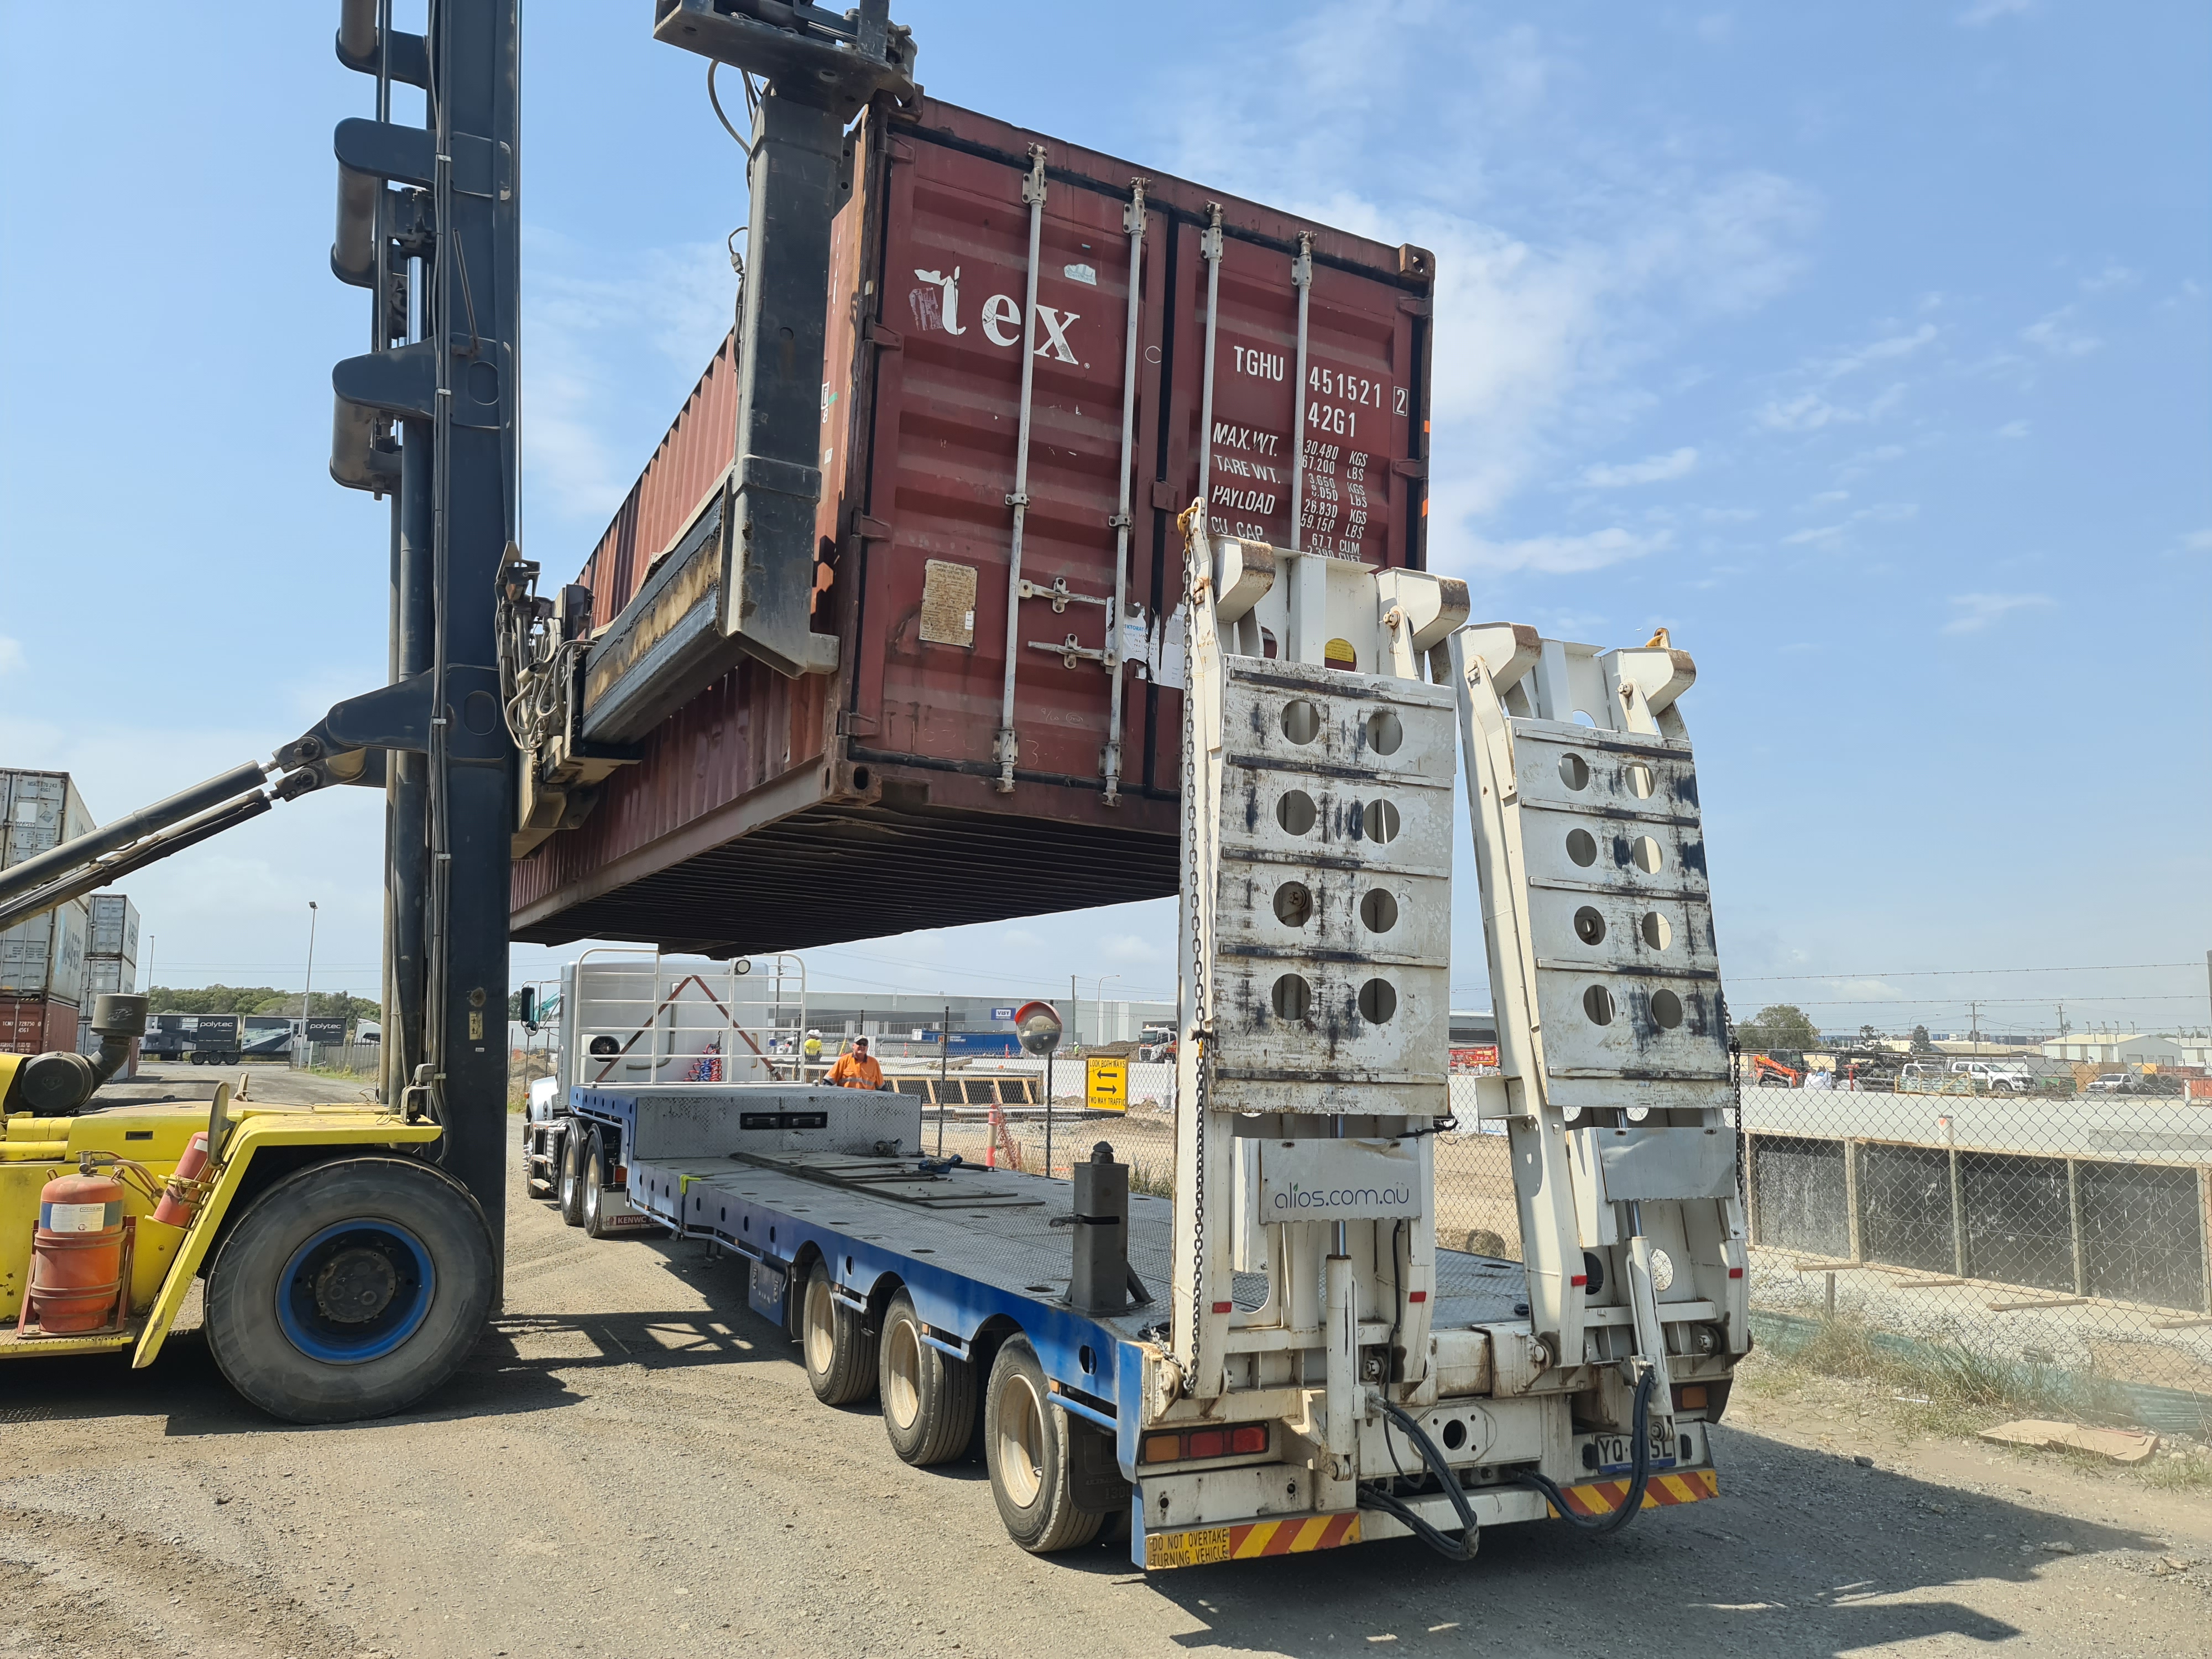 40ft shipping container getting loaded onto a truck